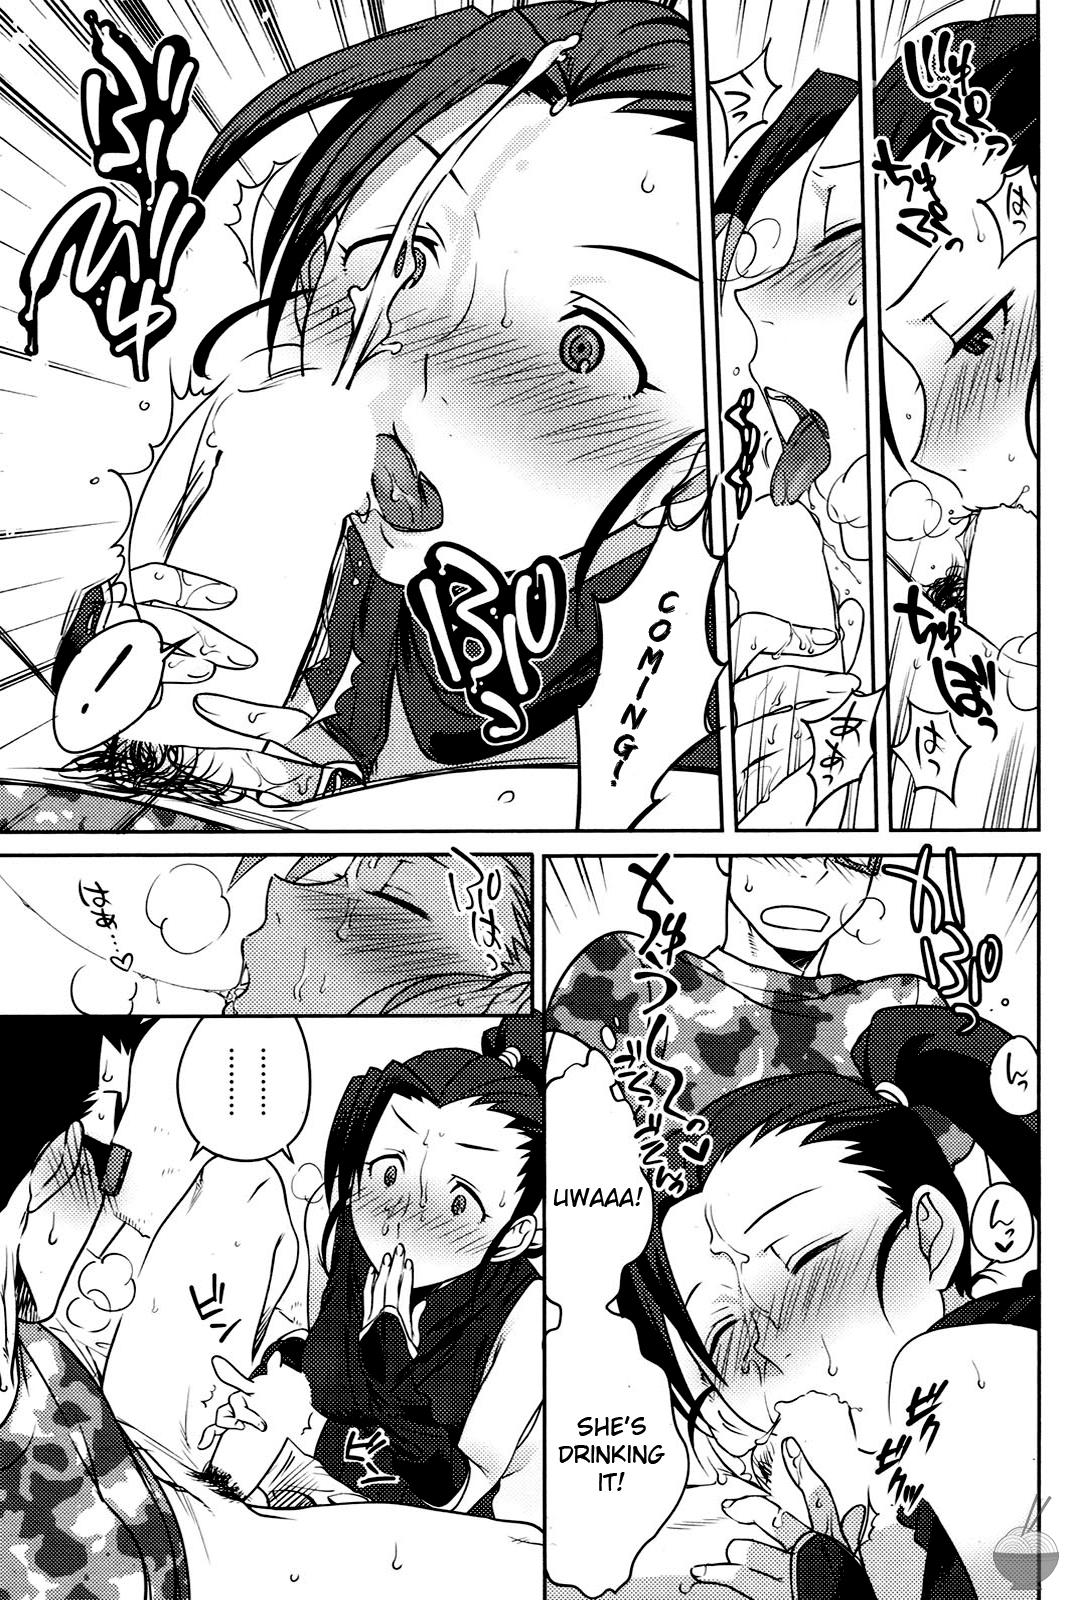 Best Blowjob There's a Ninja in my House! Culito - Page 9